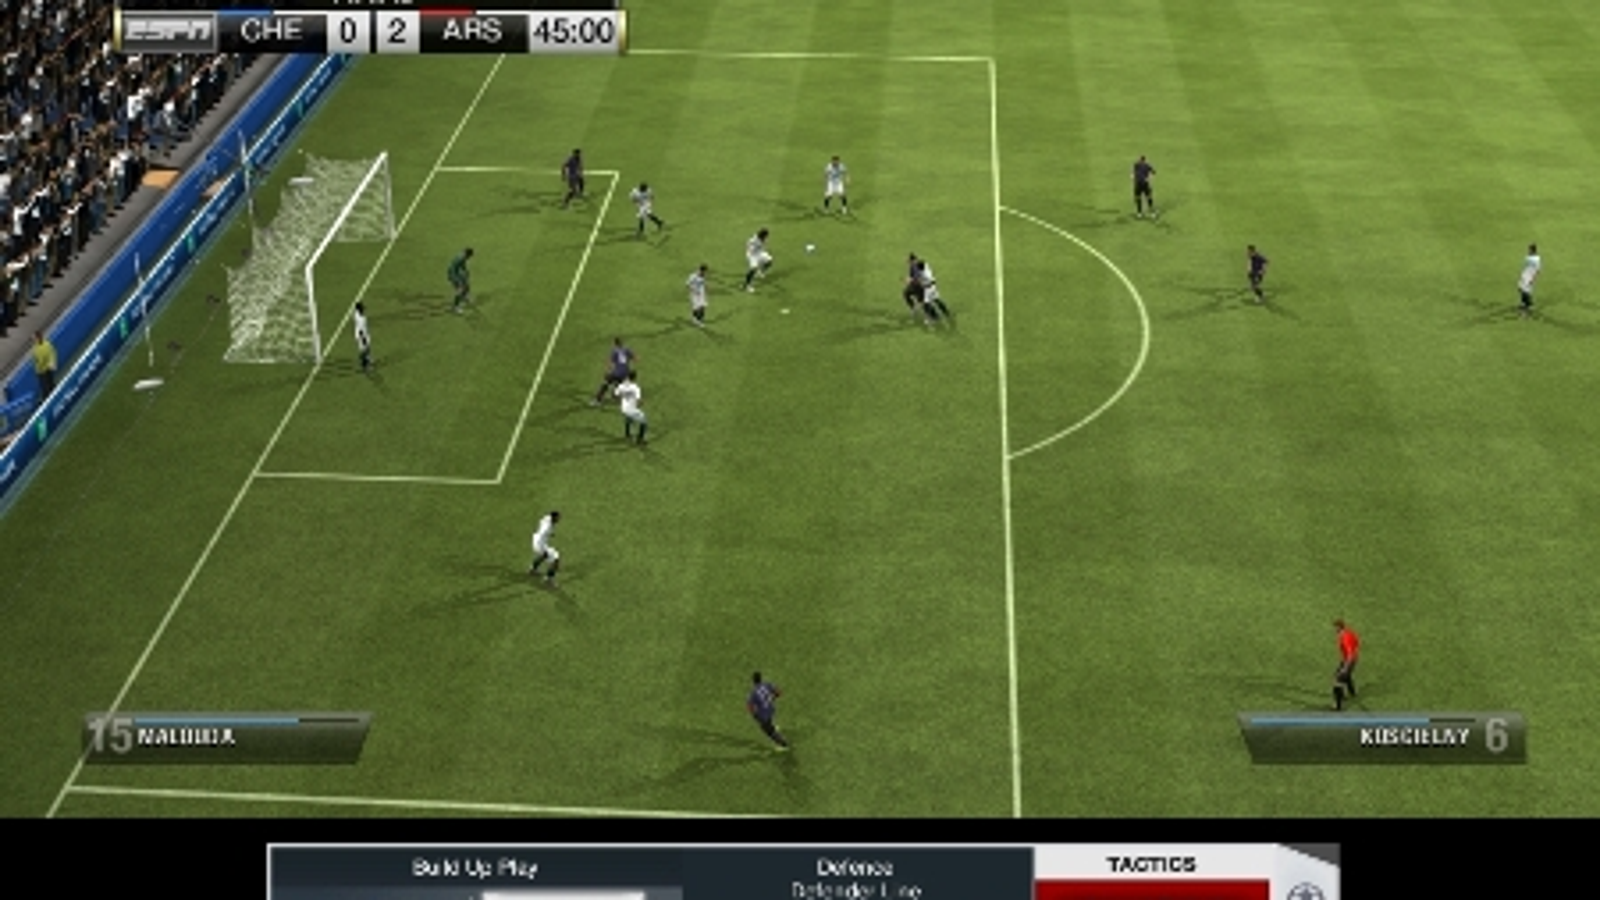 Pence interval repertoire There's good and bad news about FIFA 13 on Wii U | Eurogamer.net